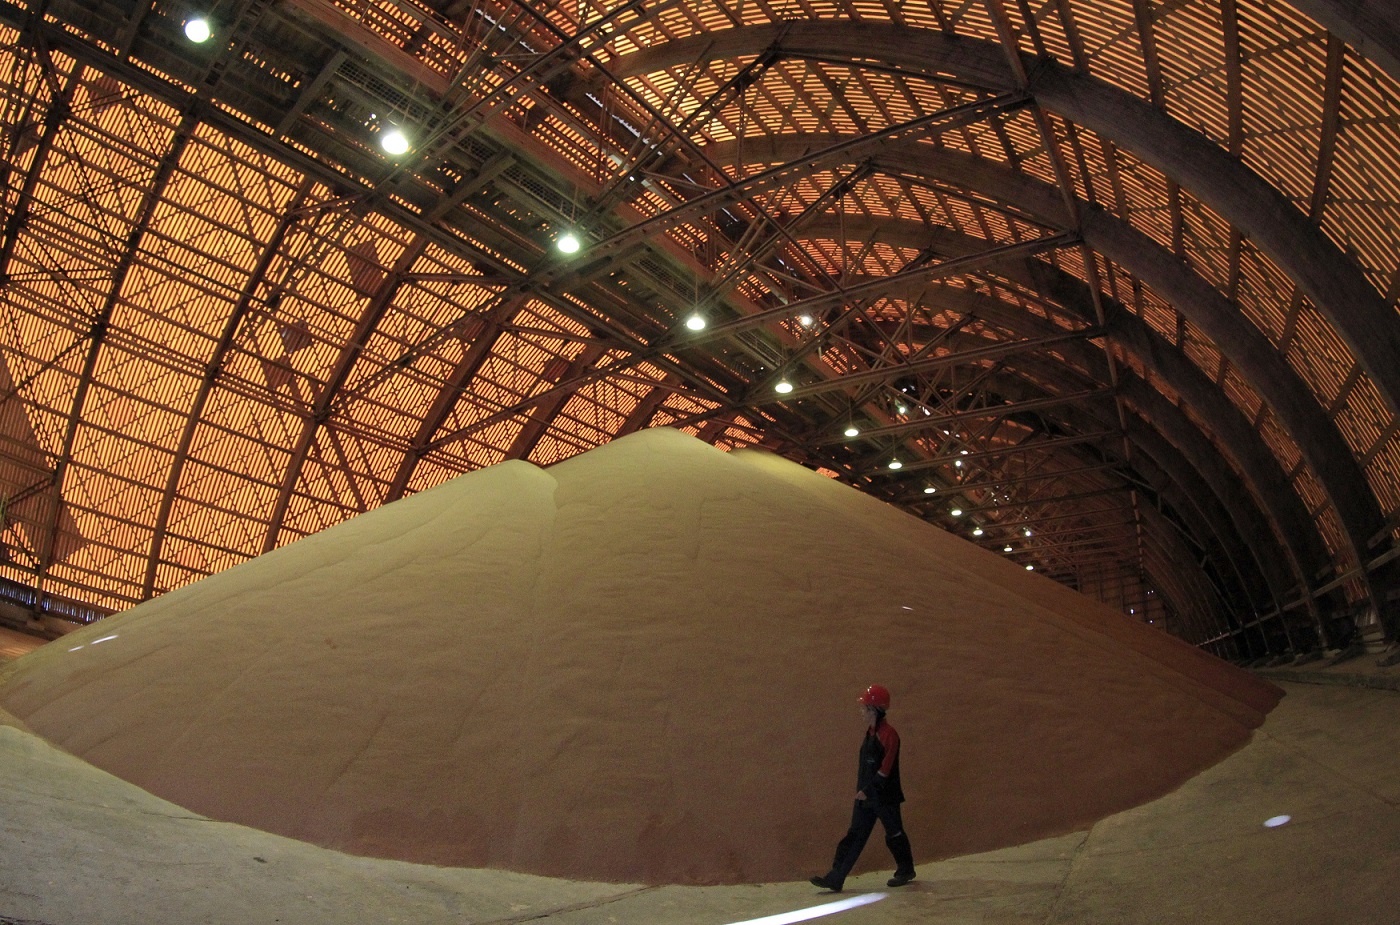 Nutrien cuts potash production after strike at Canadian ports impacts exports